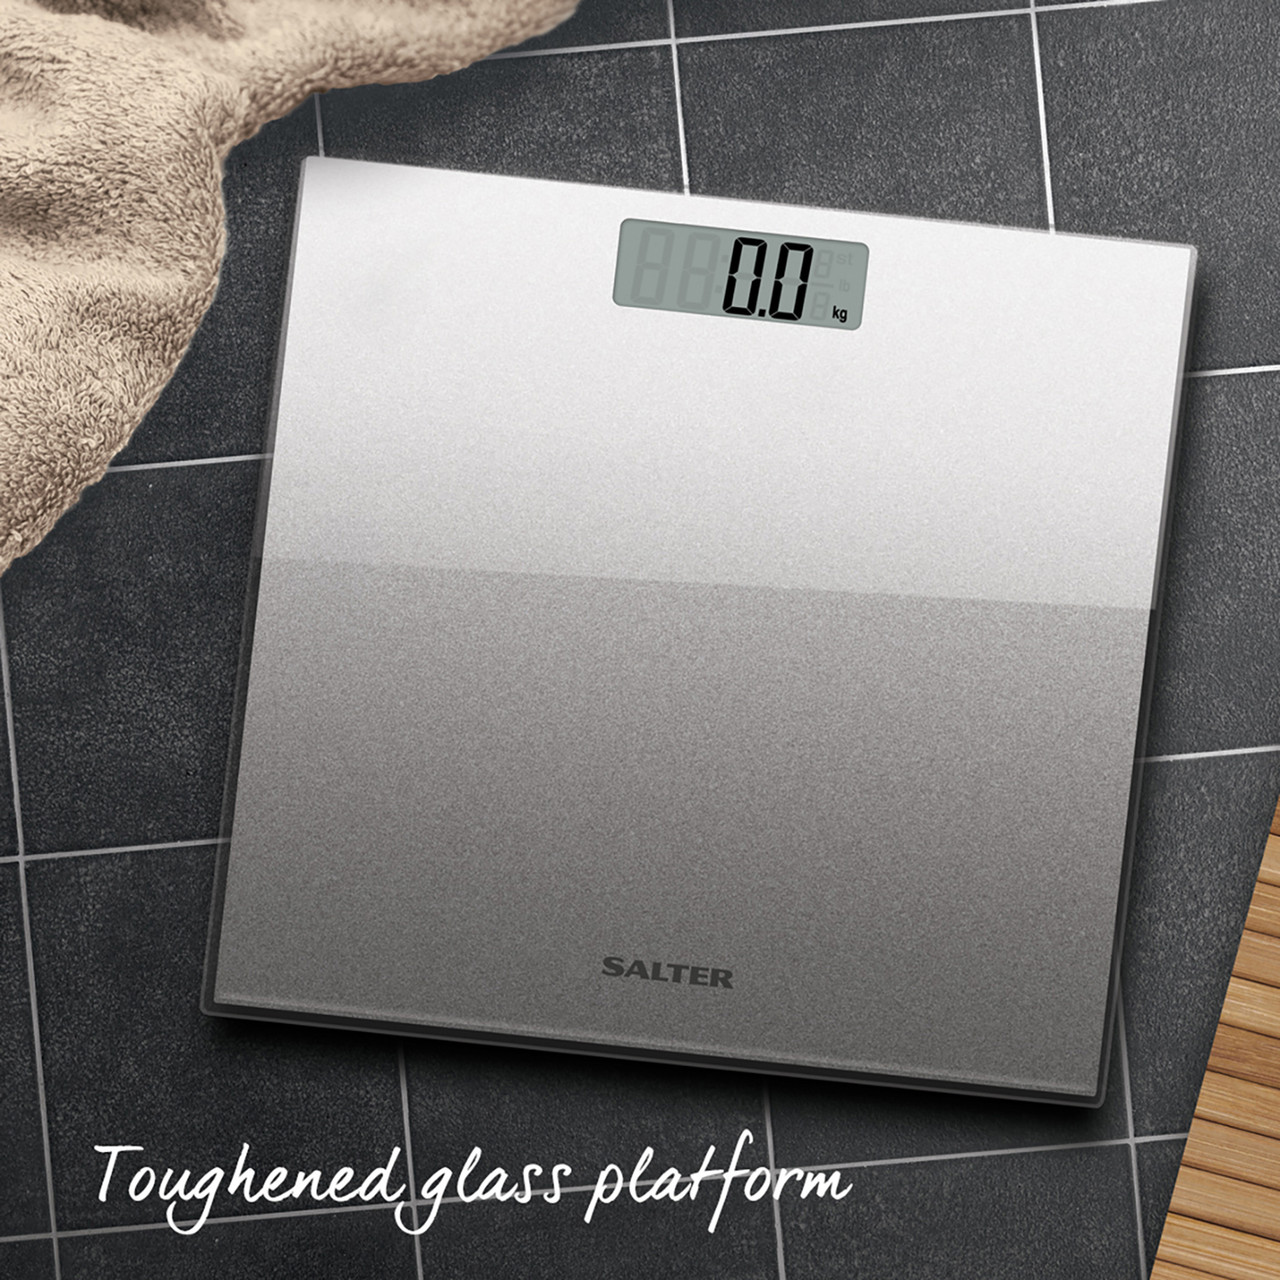 Buy Salter Eco Rechargeable Bathroom Scale 180kg at Barbeques Galore.